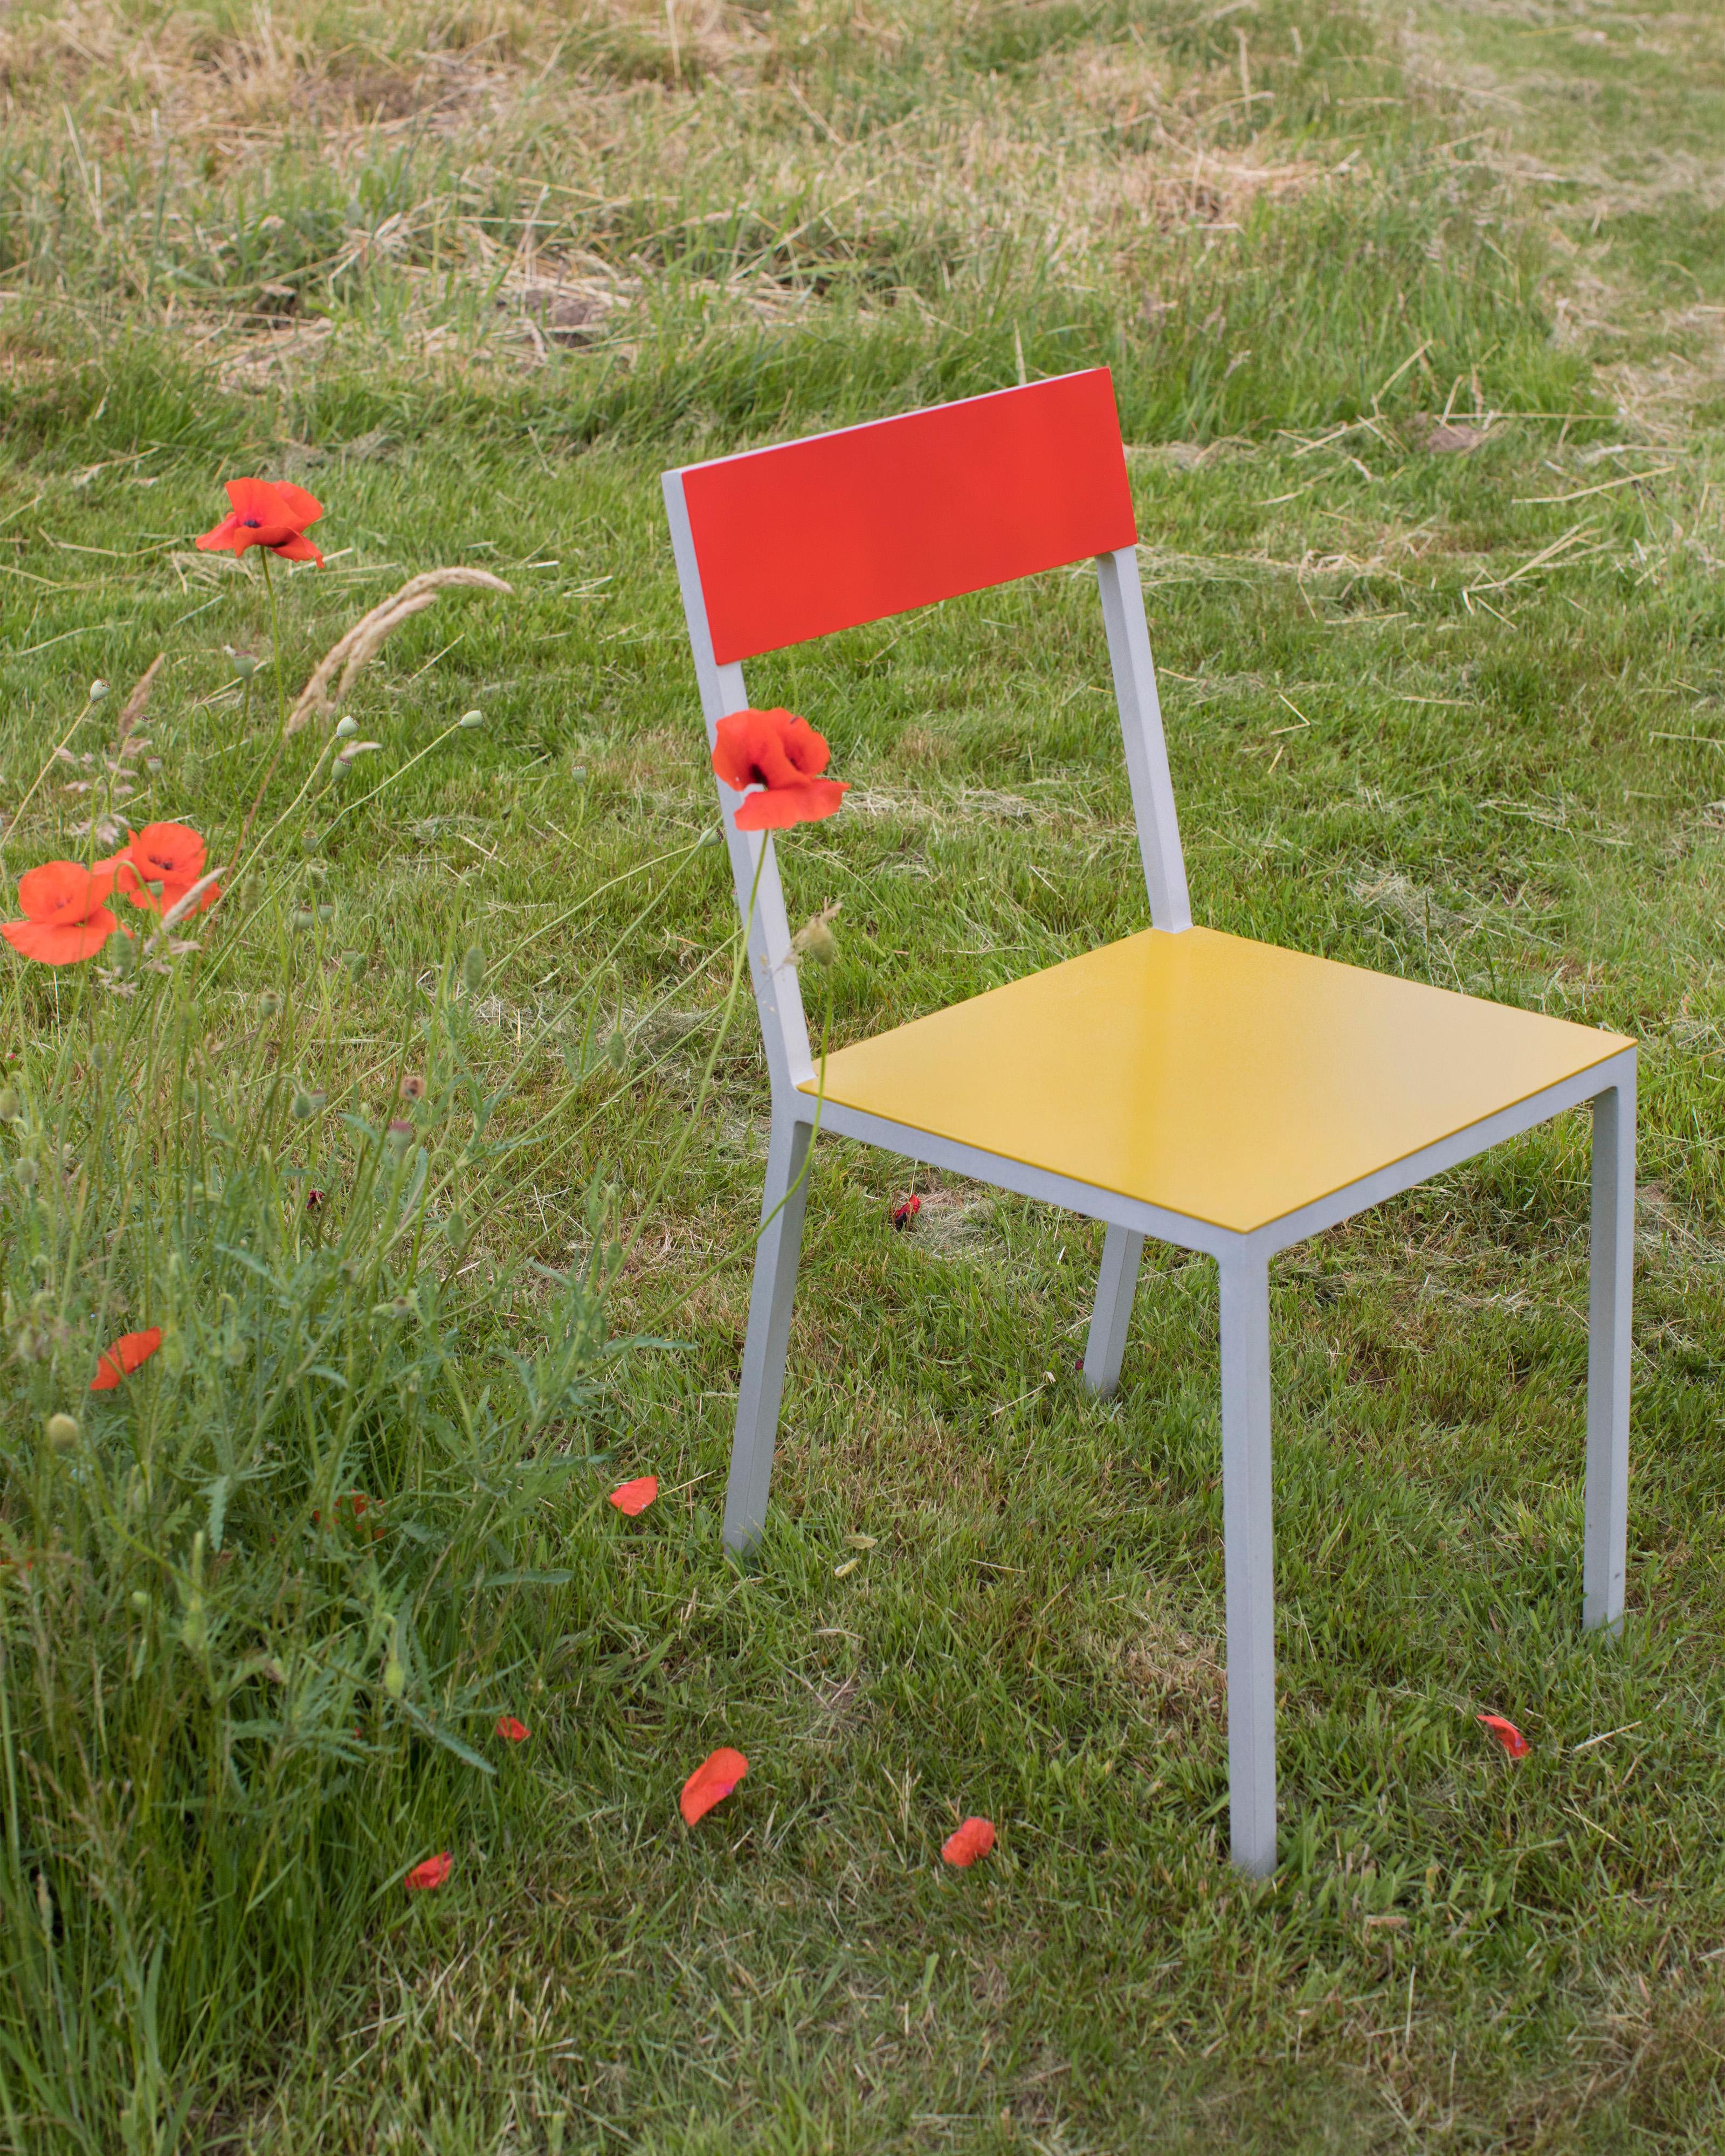 ALU contemporary chair
by muller van severen

Code: V9016035E
Model: aluminium frame, seat curry, back red 

This time Fien Muller and Hannes Van Severen revamped their classic Alu Chair by interchanging the aluminium back and seat with a wooden